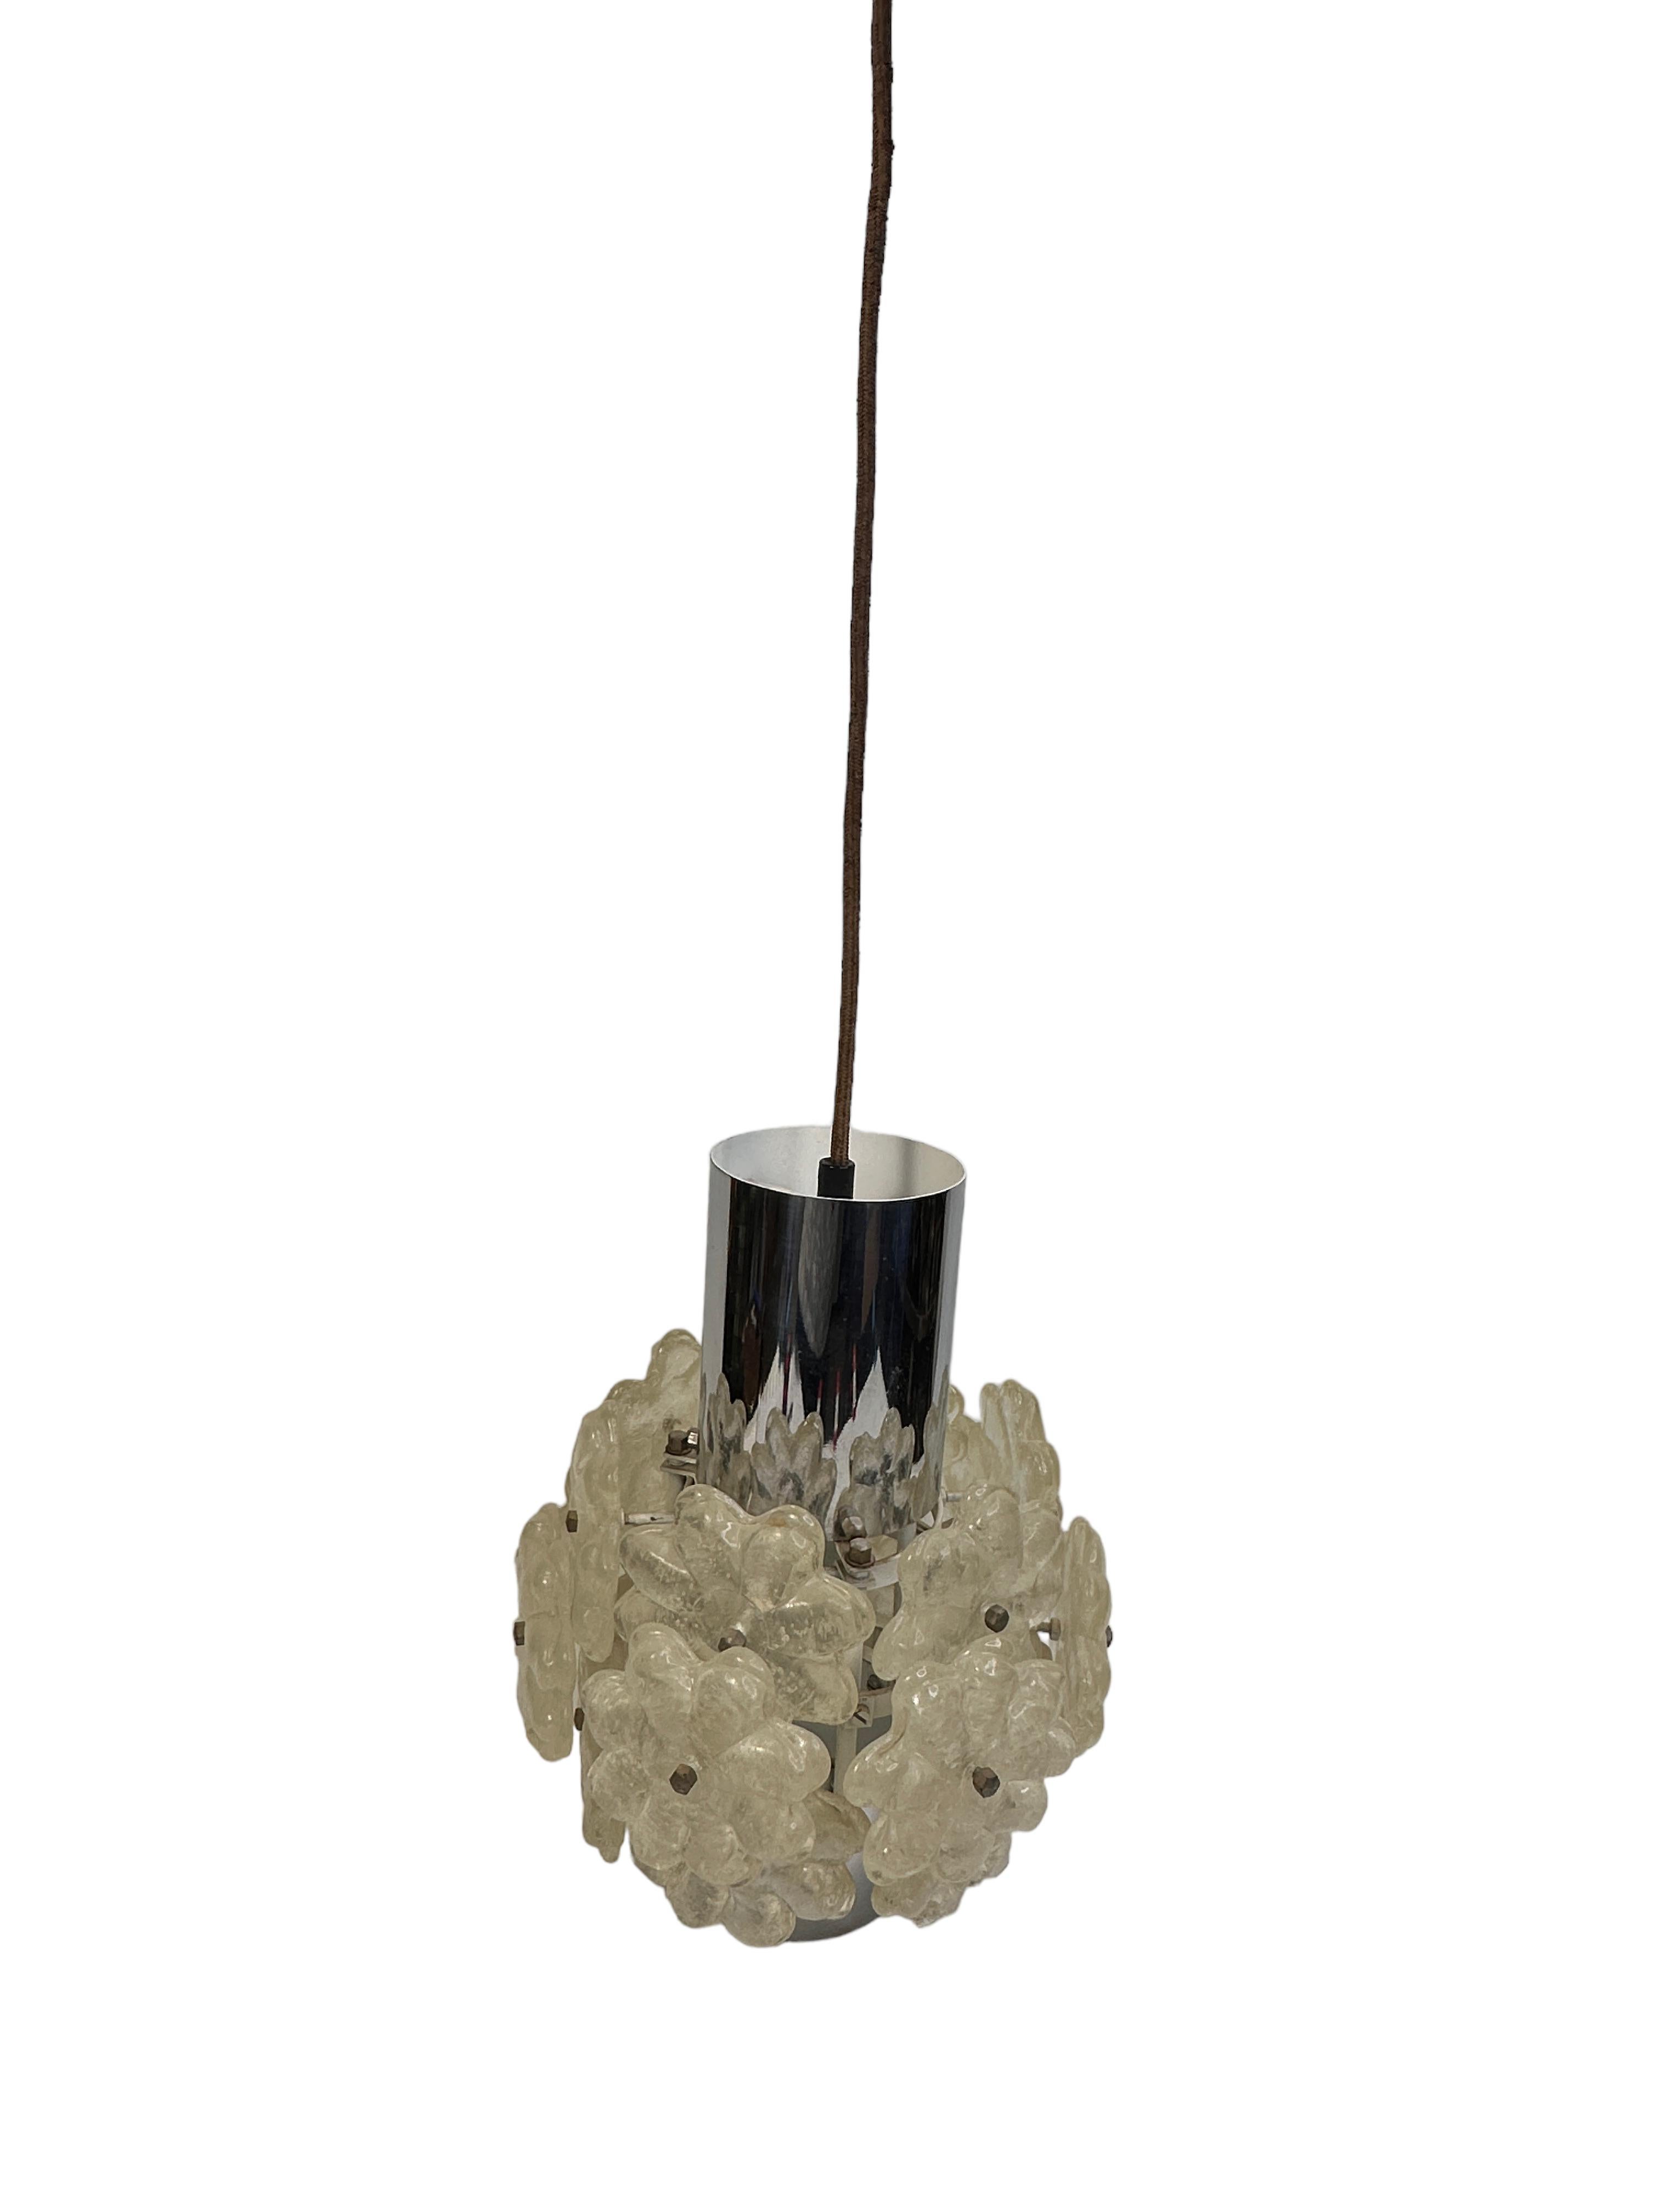 A Cylindrical chrome pendant fixture featuring Lucite flower clusters by Kalmar Austria. It is consisting of a Mid-Century Modern style design. The fixture requires an European E27 / 110 Volt Edison bulb, up to 60 watts. Found at an estate sale in